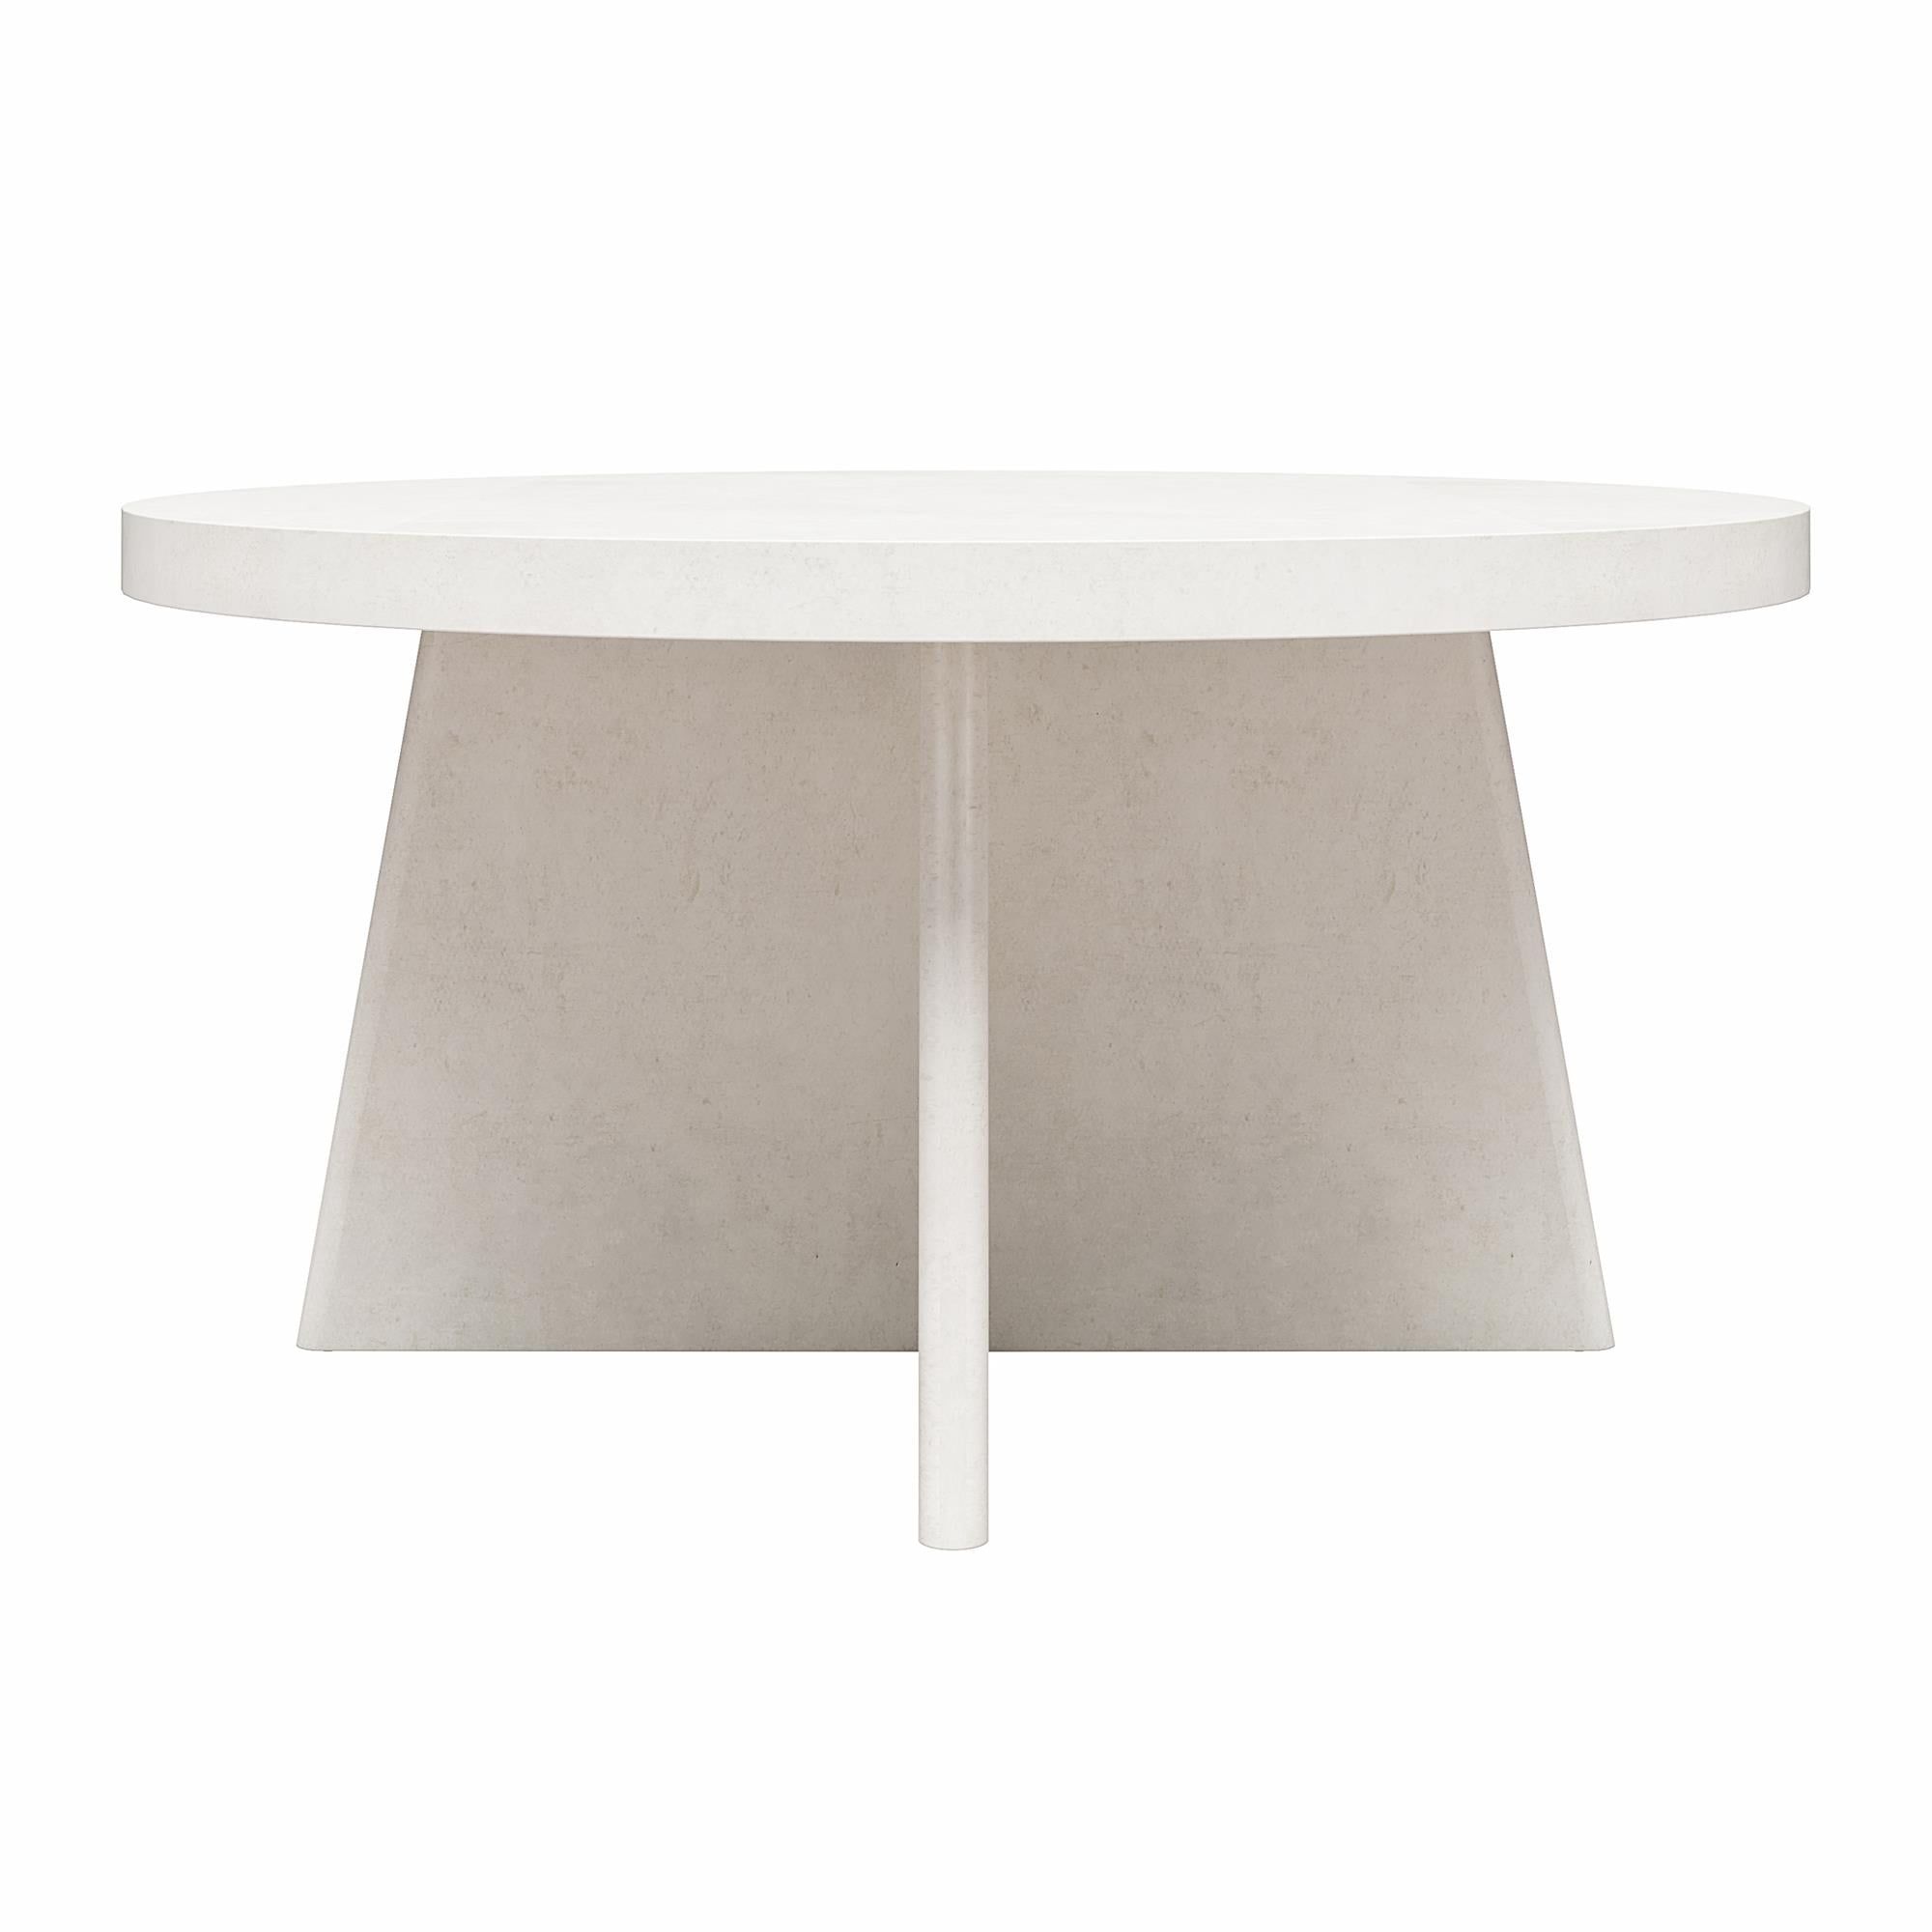 Queer Eye Liam Round Coffee Table, Plaster – Walmart For Liam Round Plaster Coffee Tables (View 11 of 15)